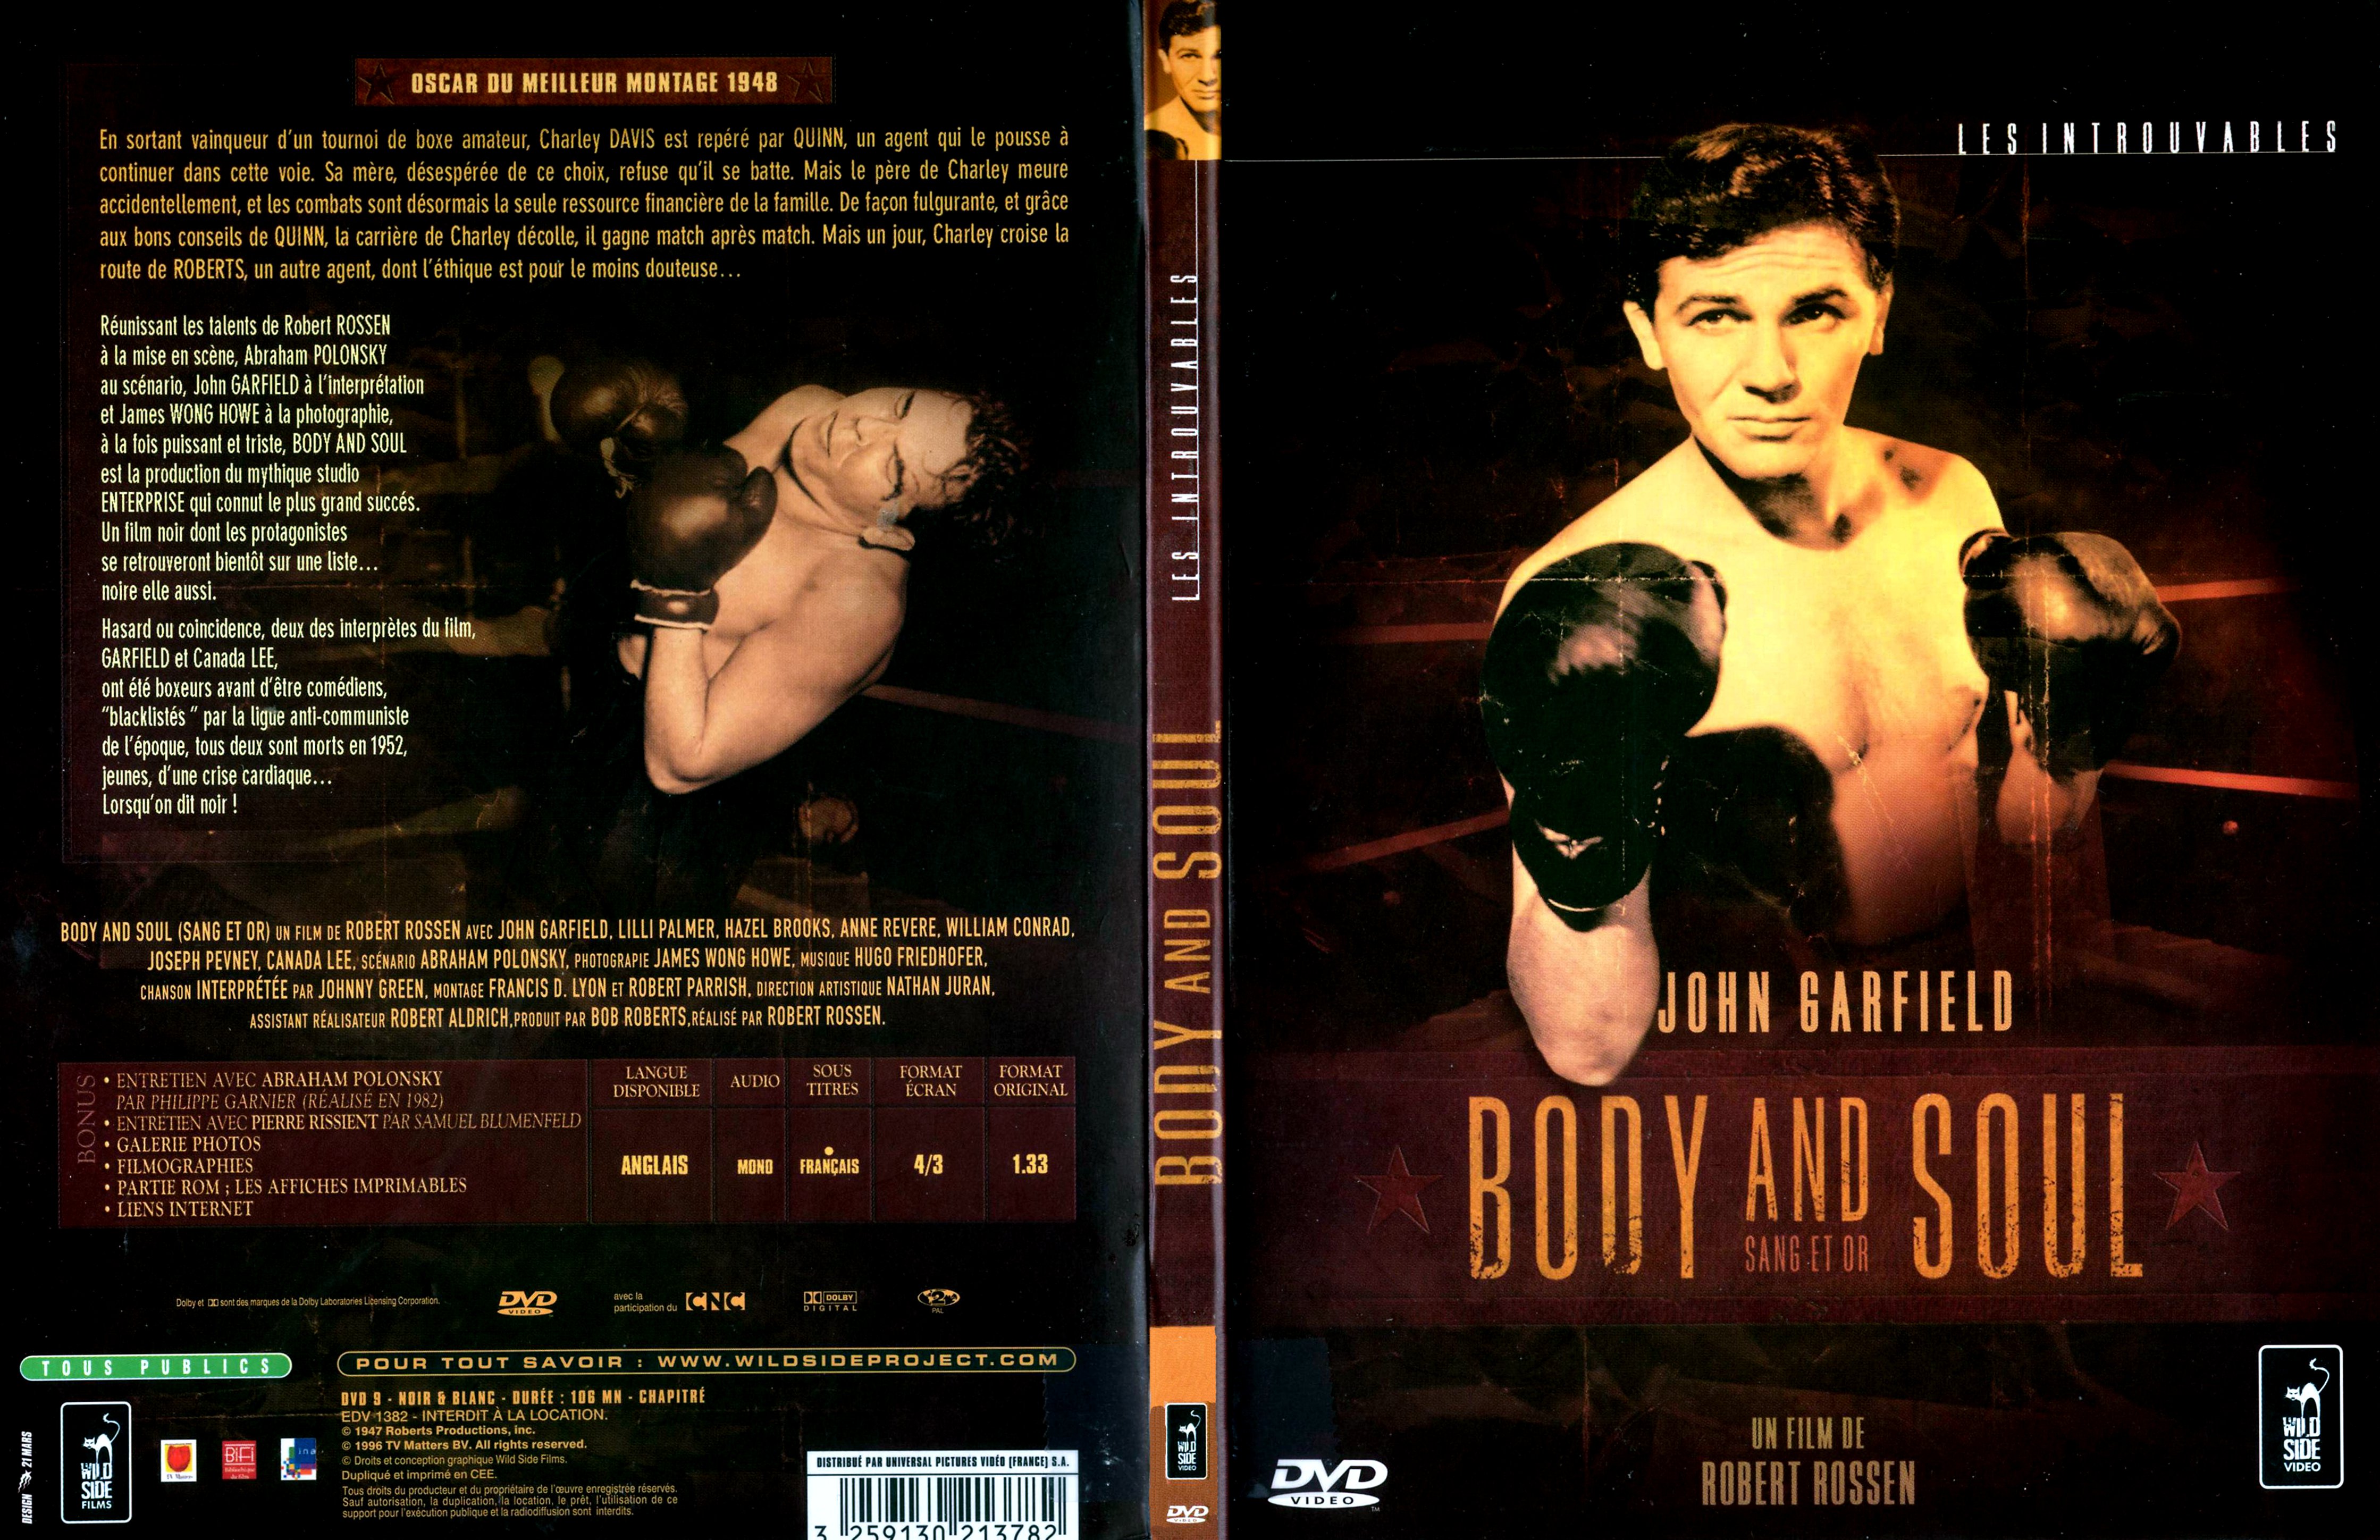 Jaquette DVD Body and soul - Sang et or